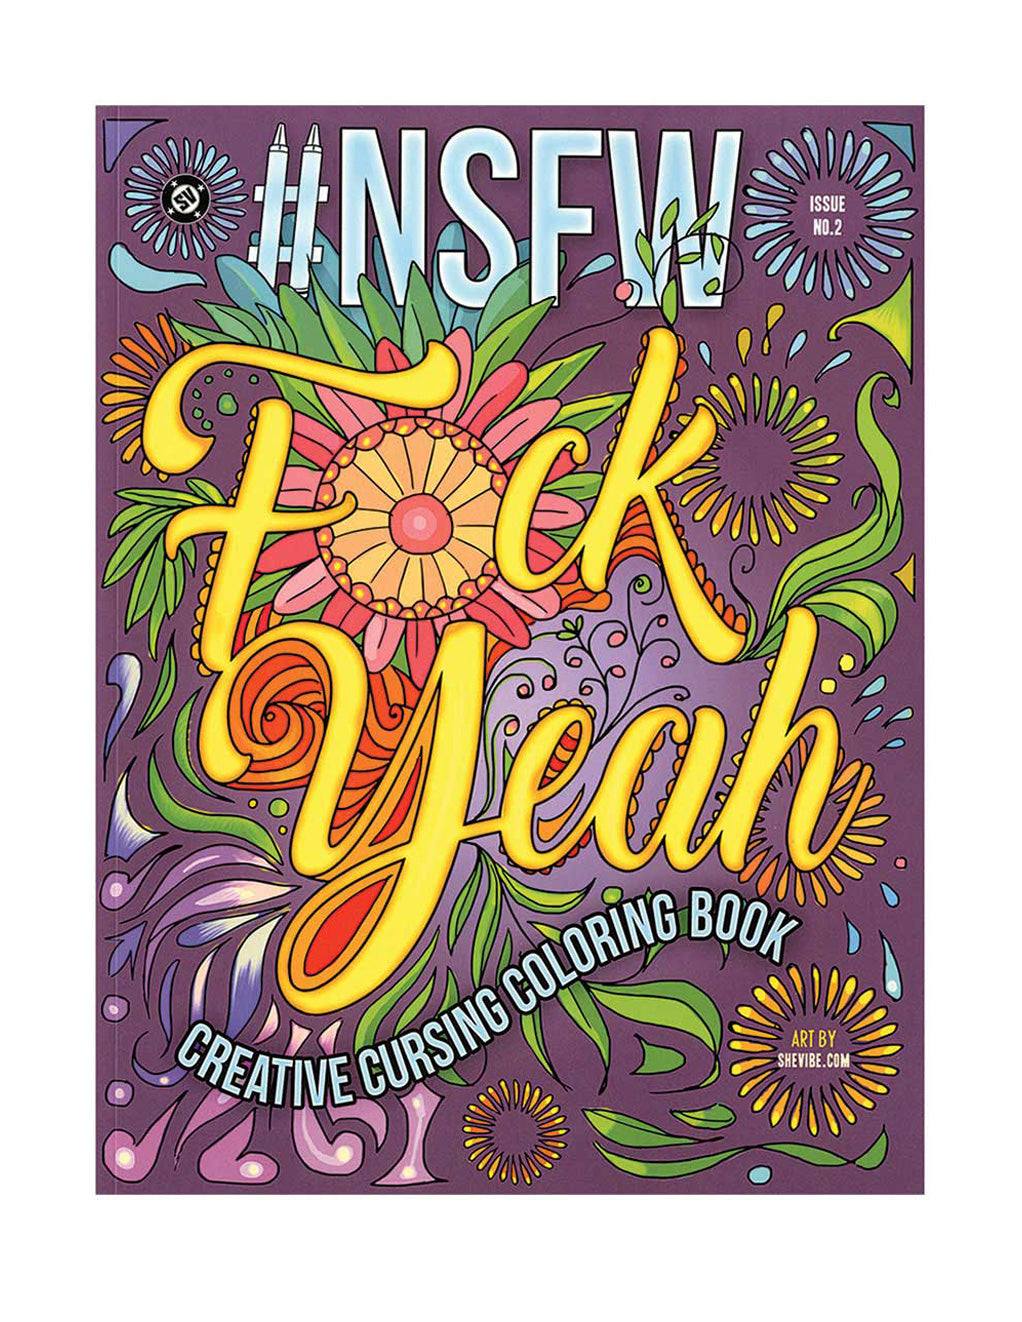 #NSFW Creative Cursing Coloring Book by Lady Cheeky and SheVibe